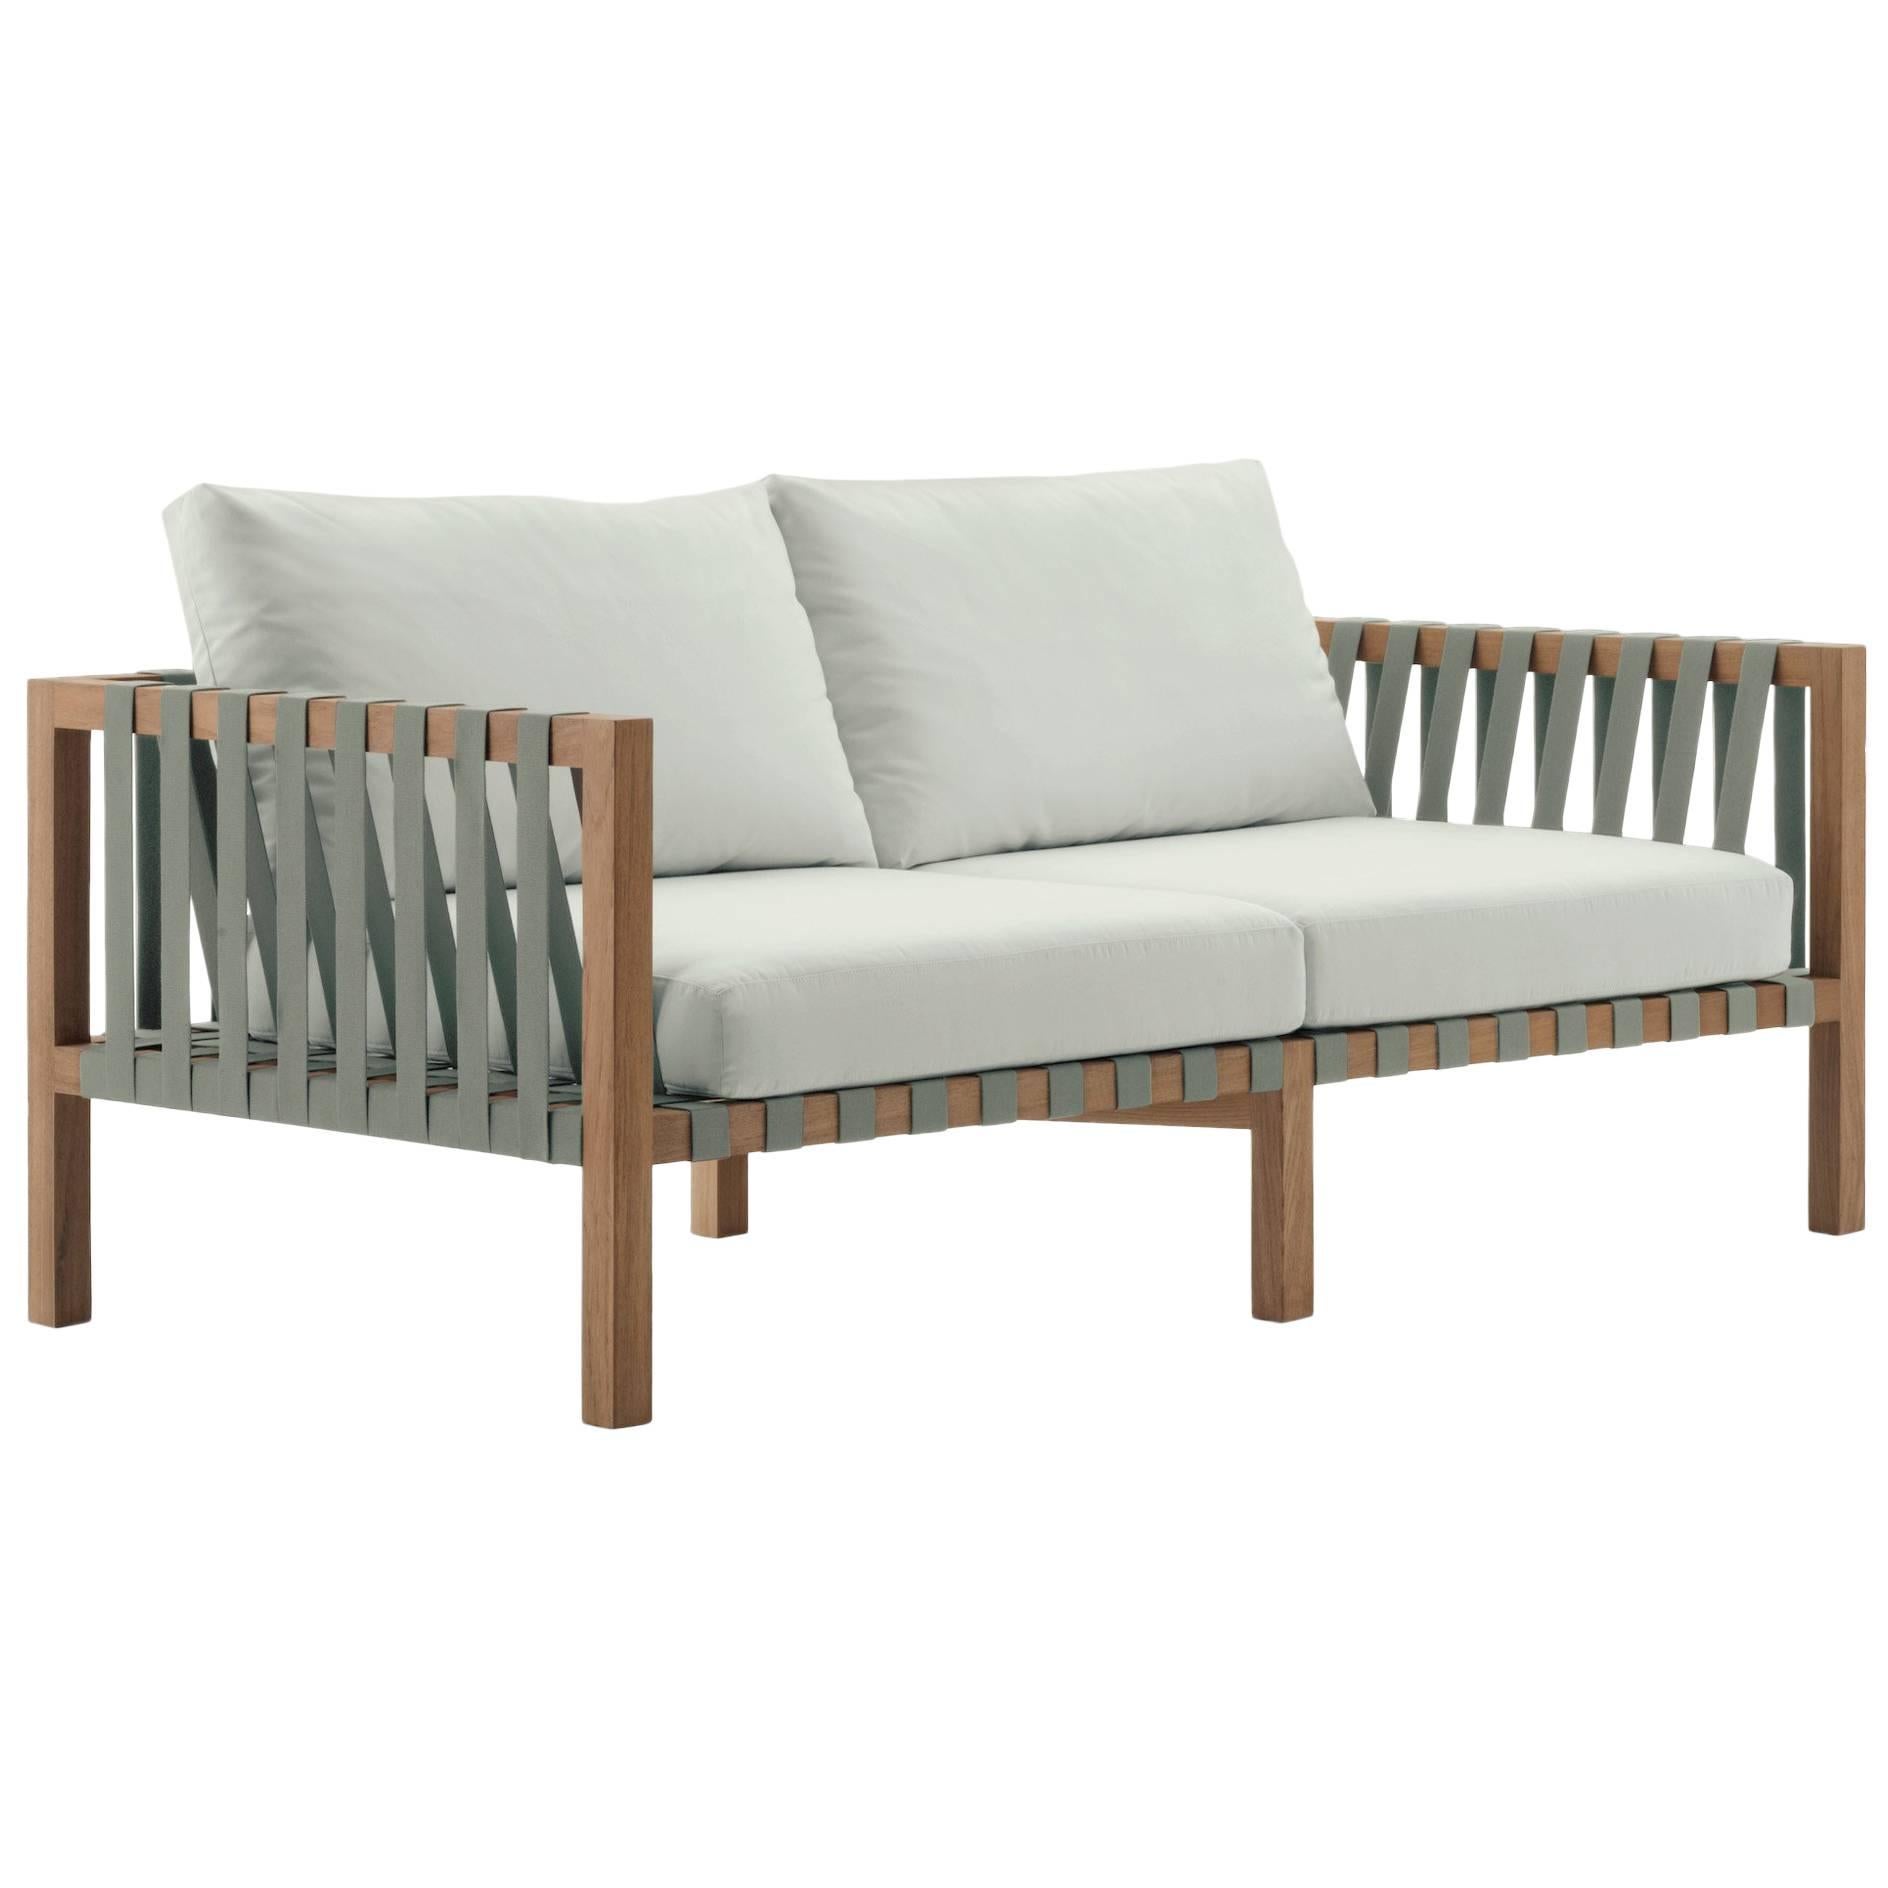 Roda Mistral 102 Two-Seat Sofa in Teak for Outdoor/Indoor Use For Sale